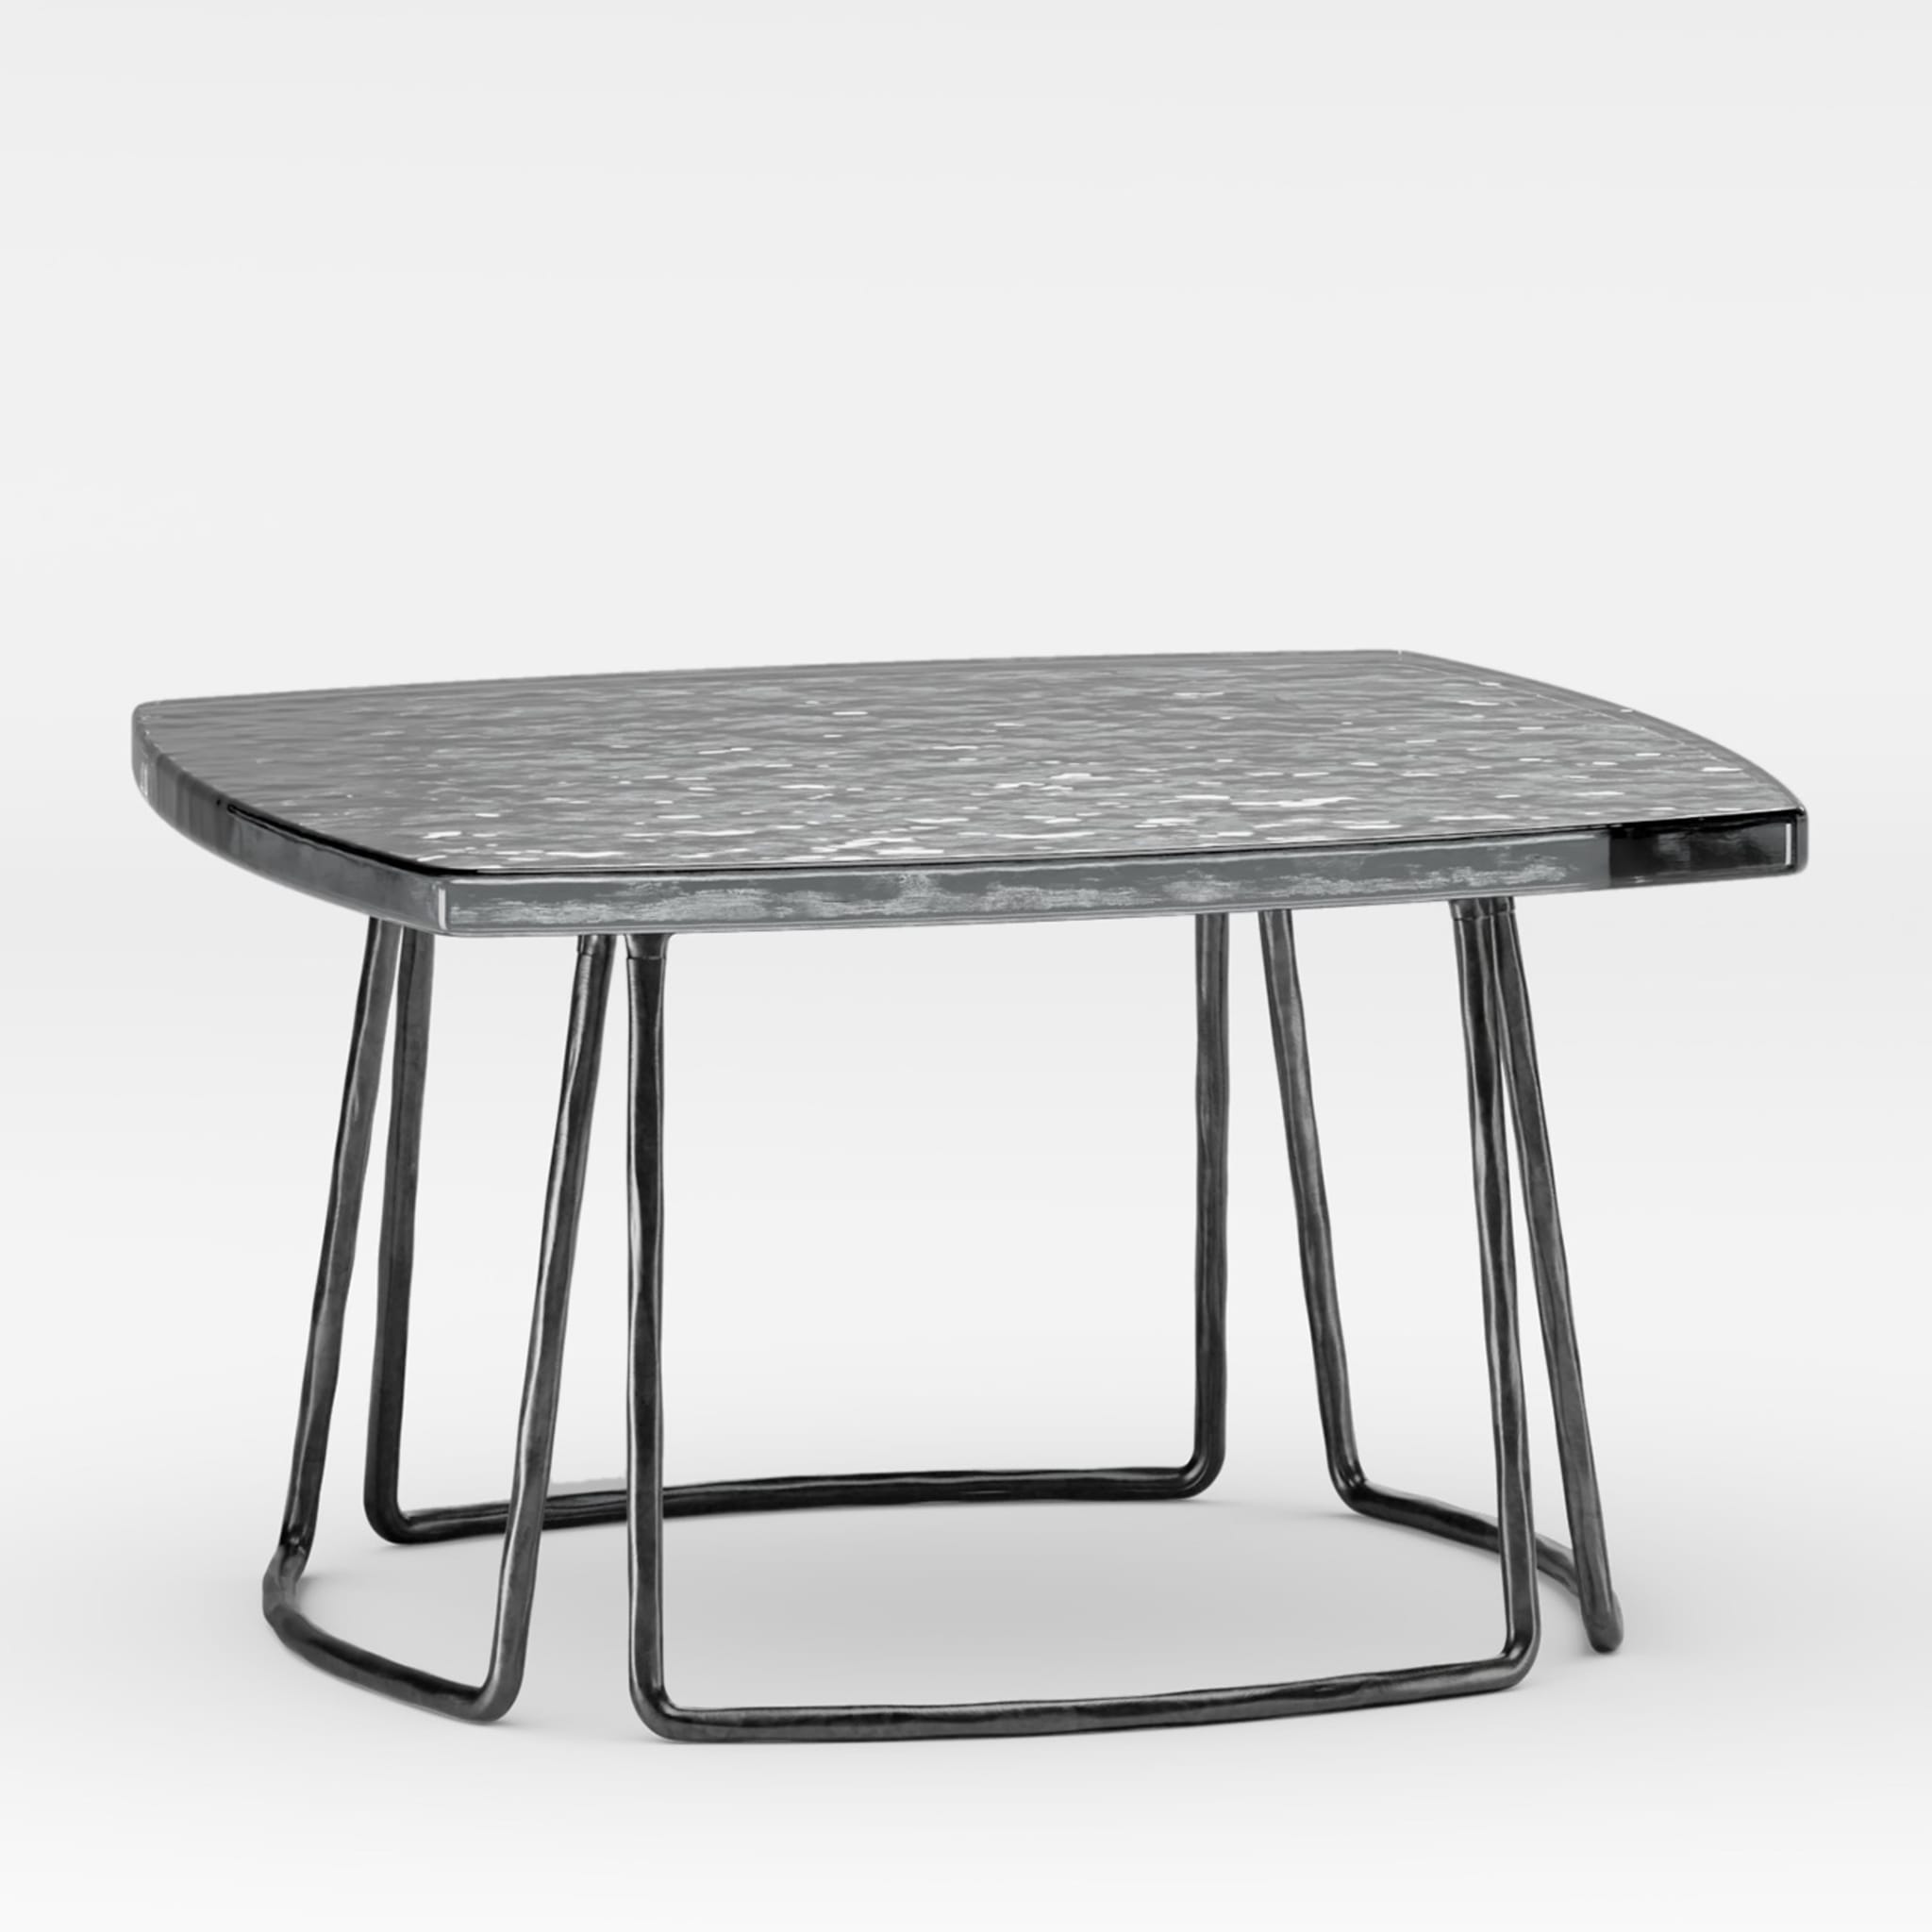 Type Small Silver Side Table by Stormo Studio - Alternative view 1